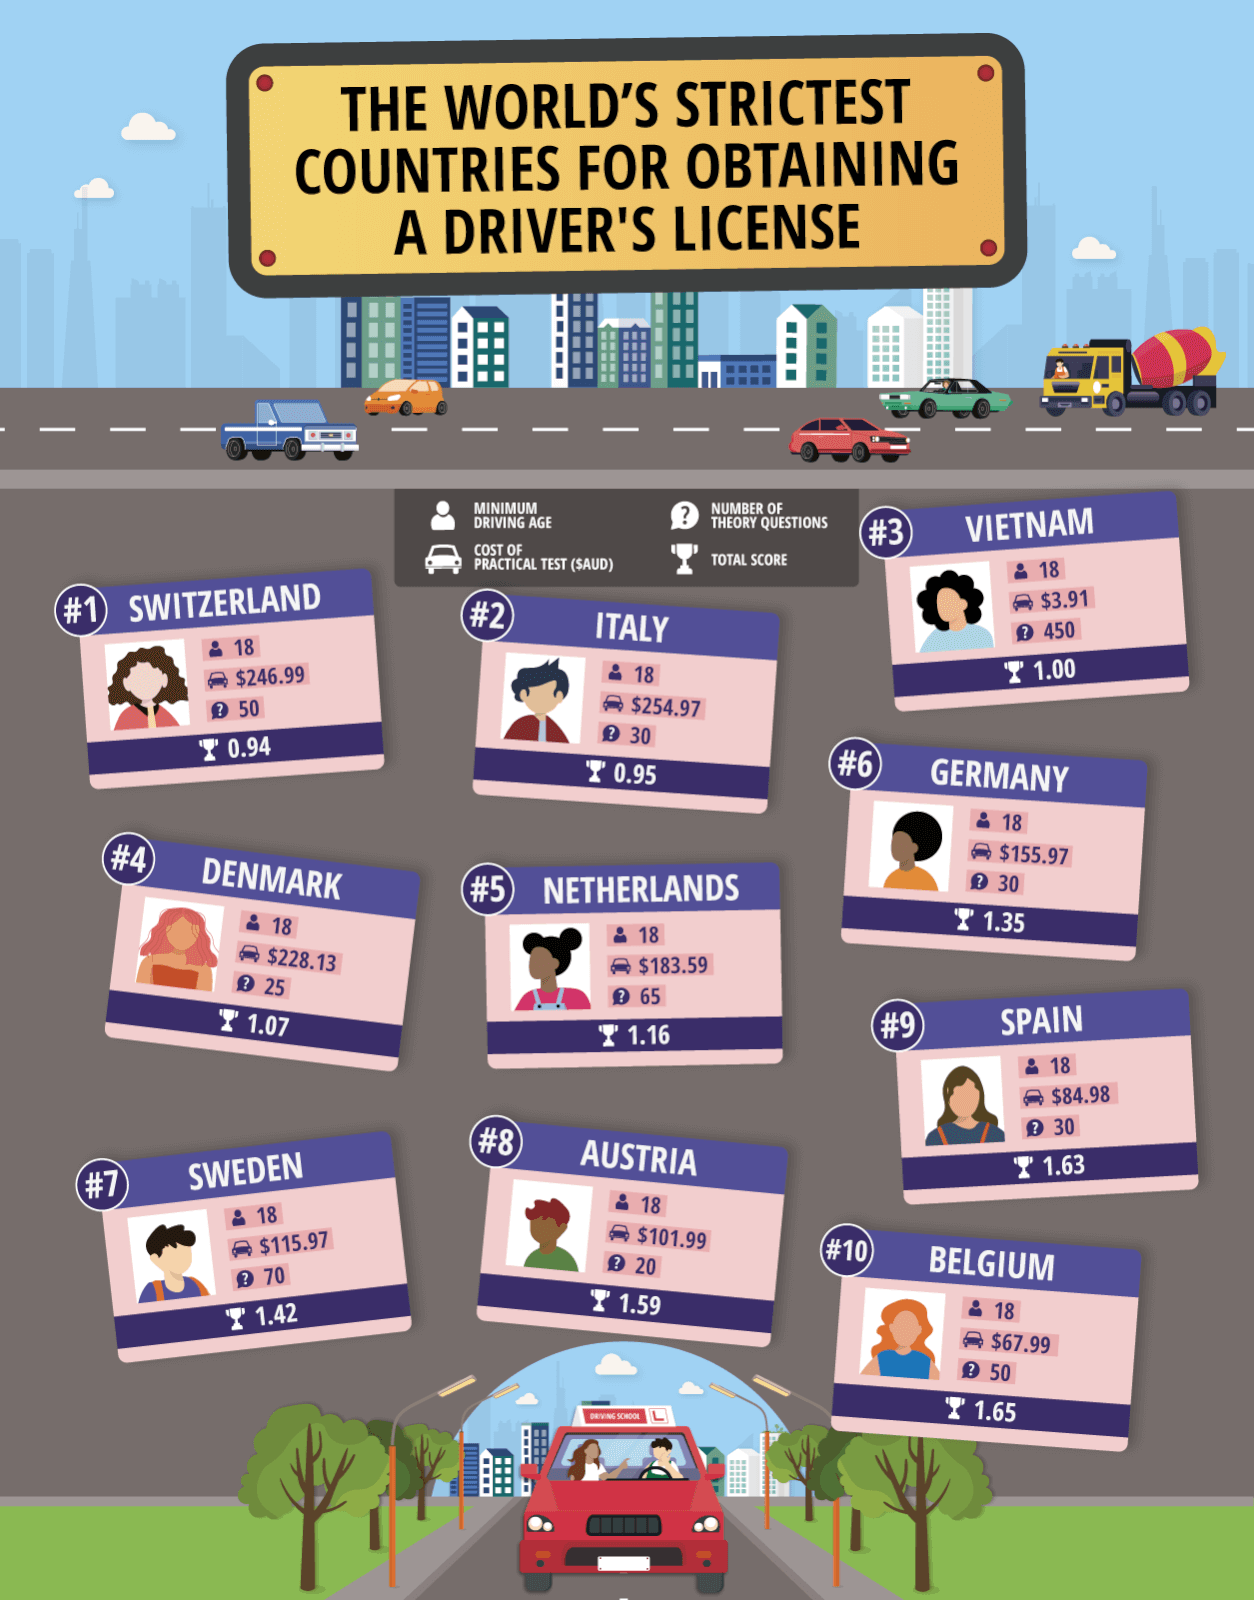 Image showing the ten strictest countries for obtaining a driver's license.